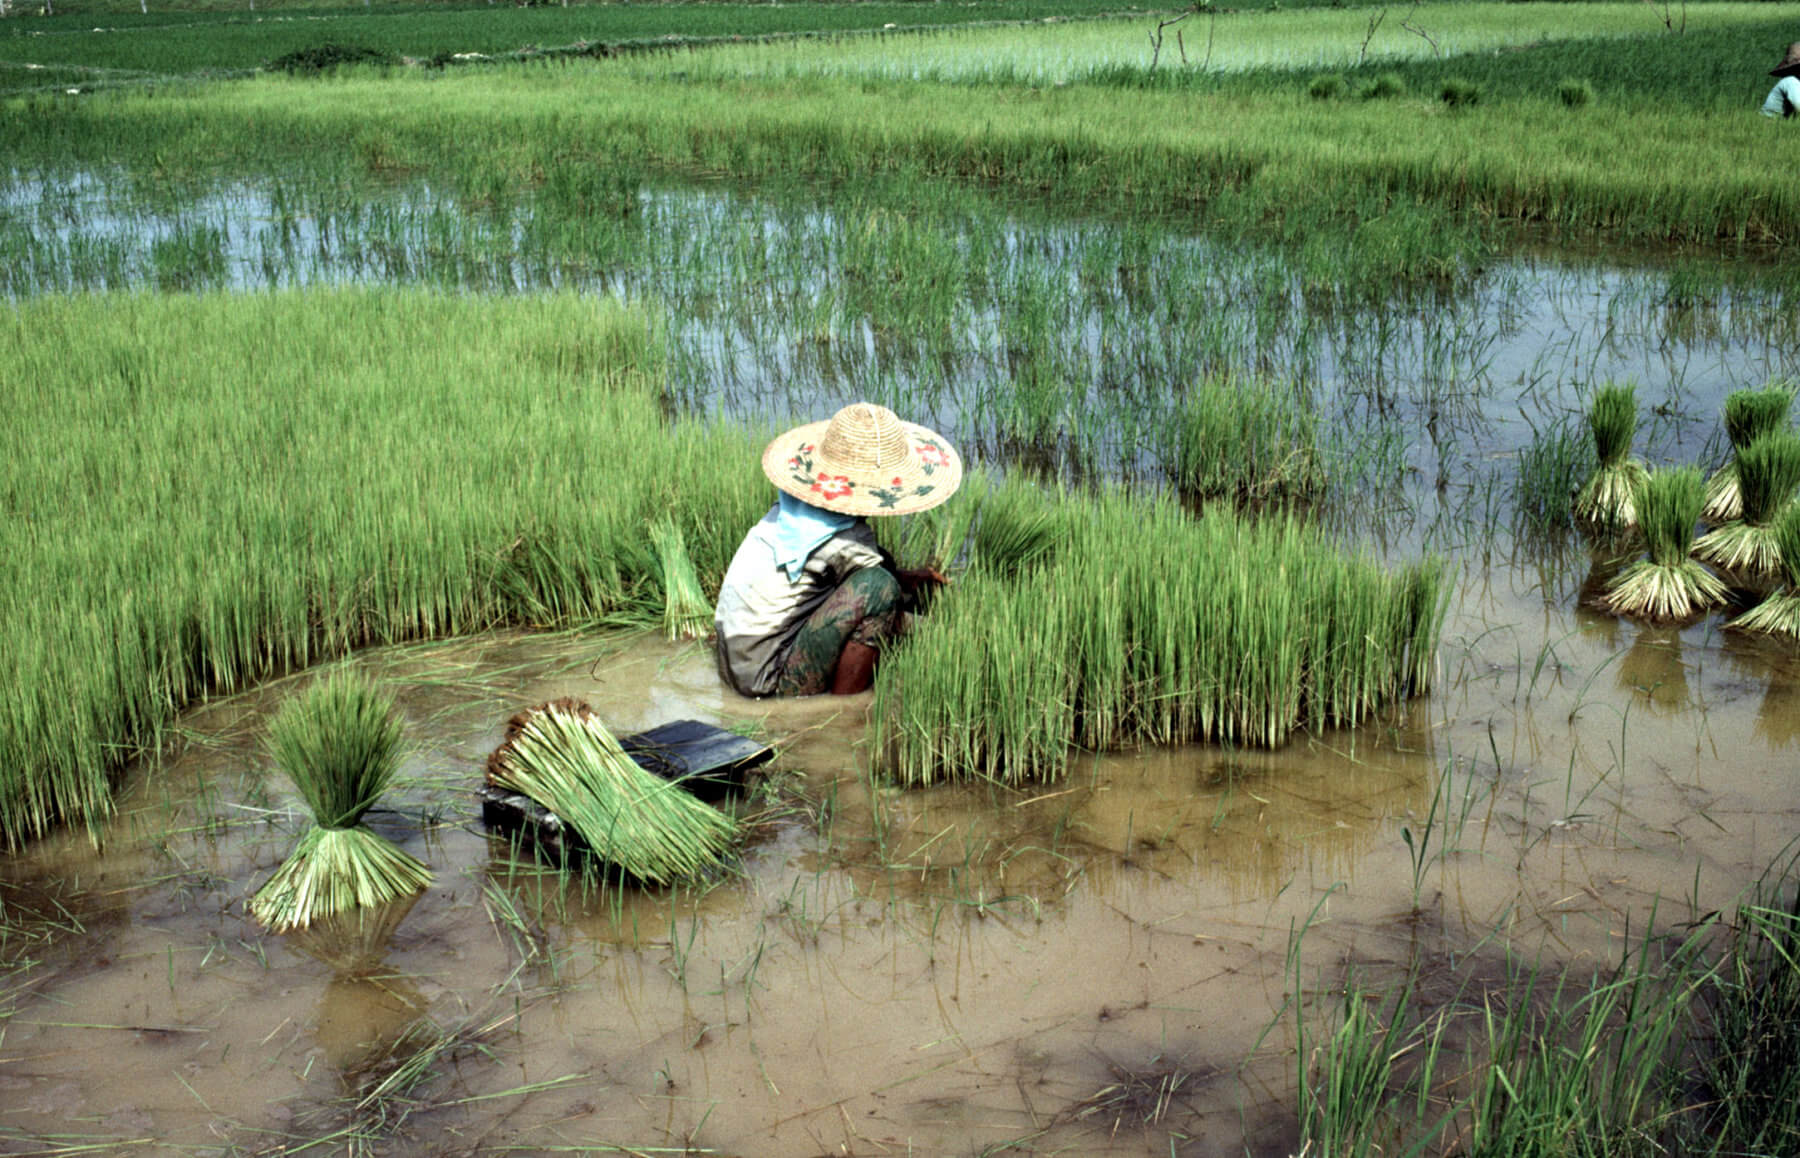 Transplanting rice in Malaysia. Photo by F. Bray